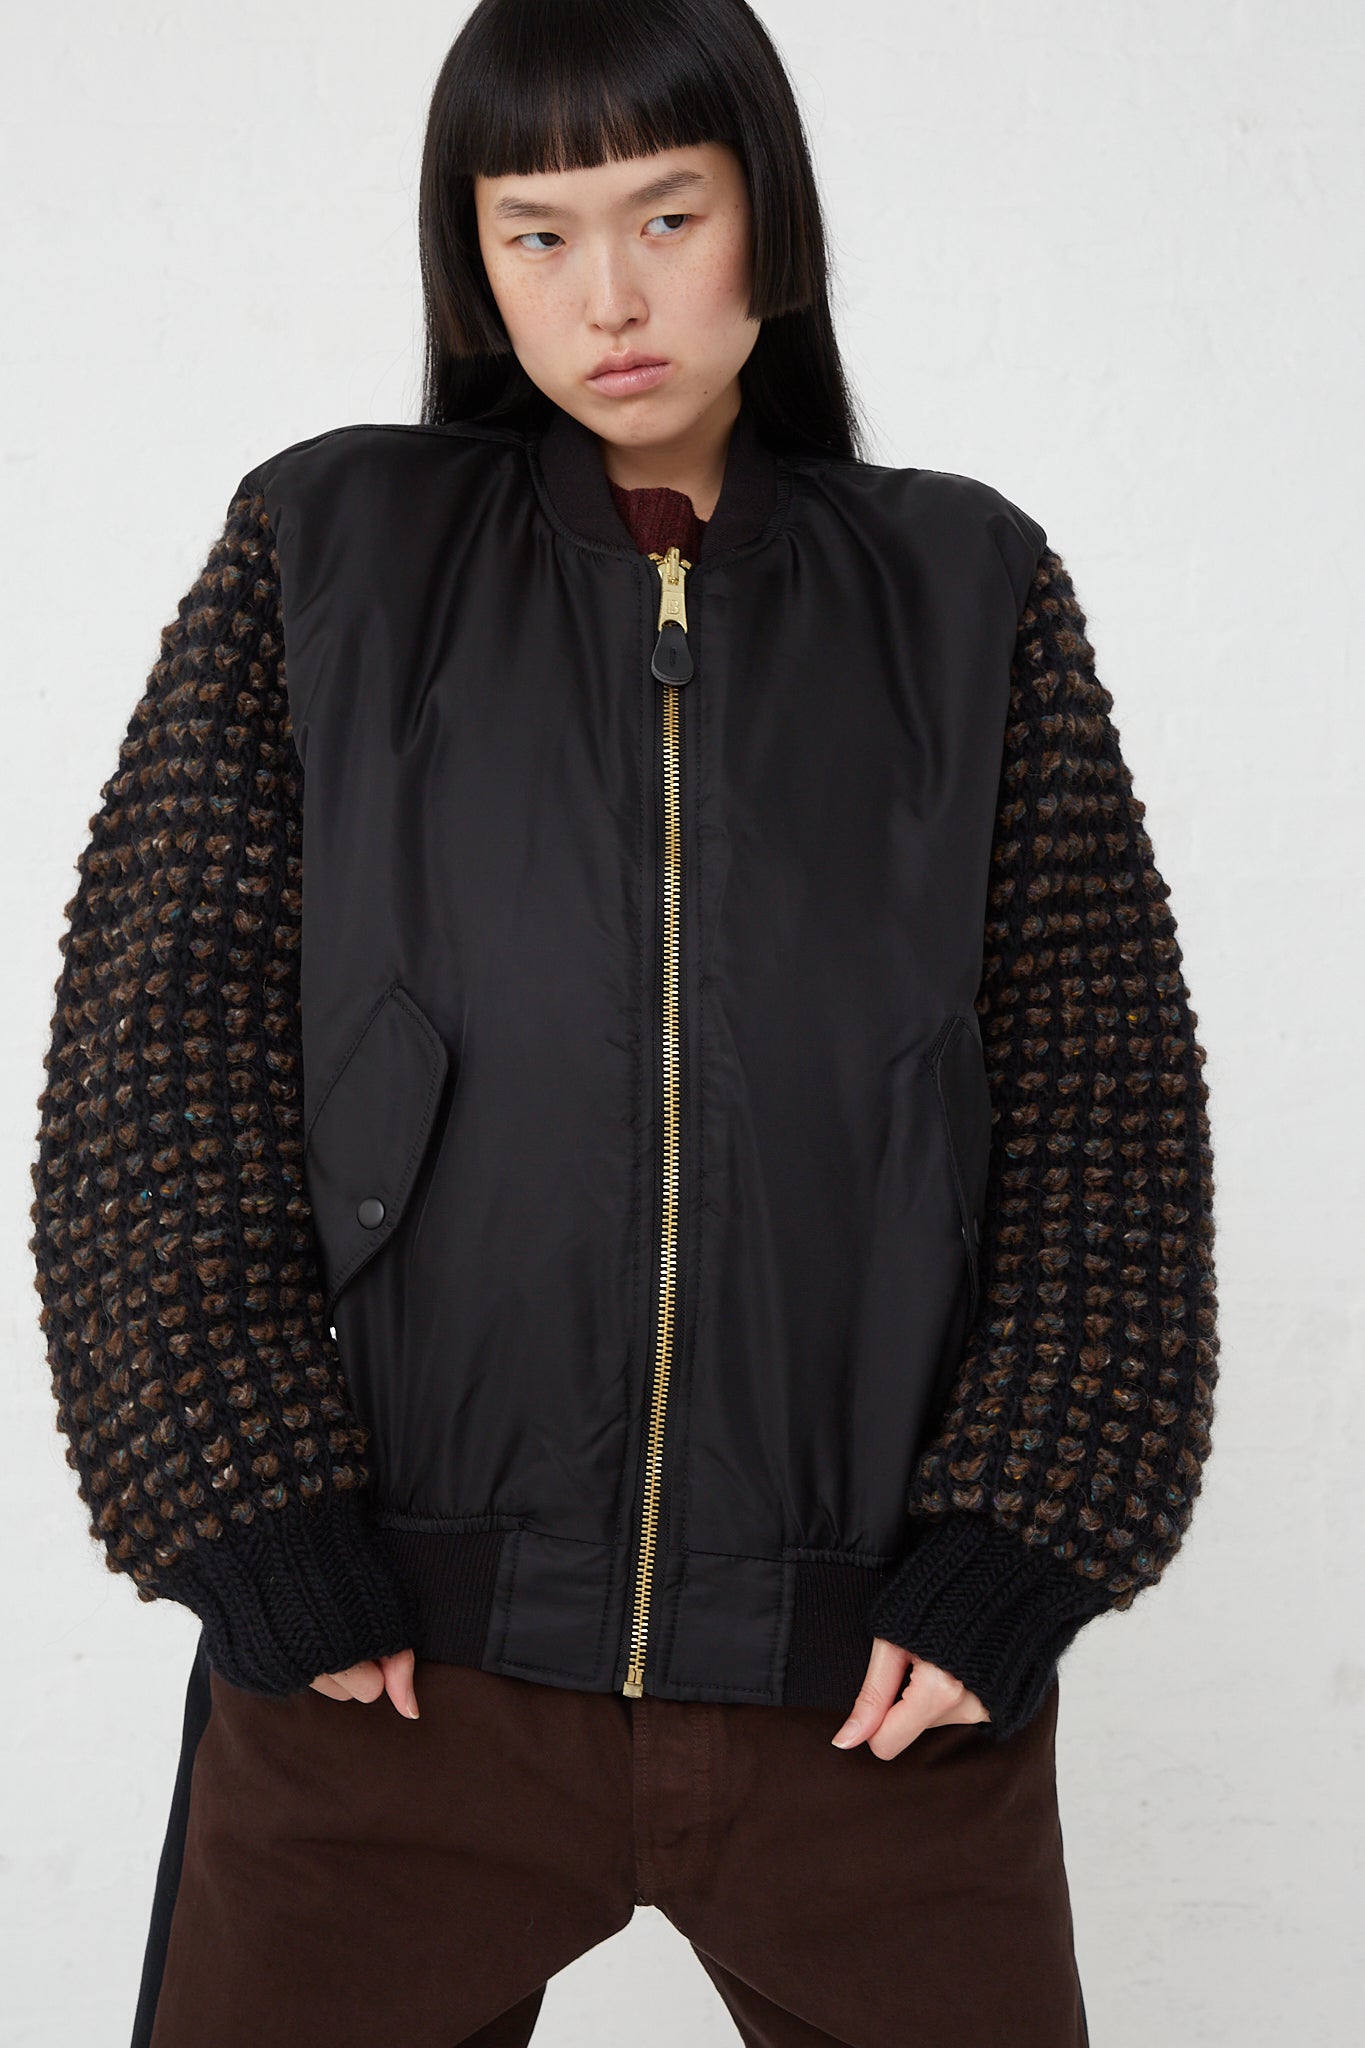 An oversized woman's Bless Sleeve Bomber No. 70 in Black, in a nylon and wool blend, paired with brown pants.